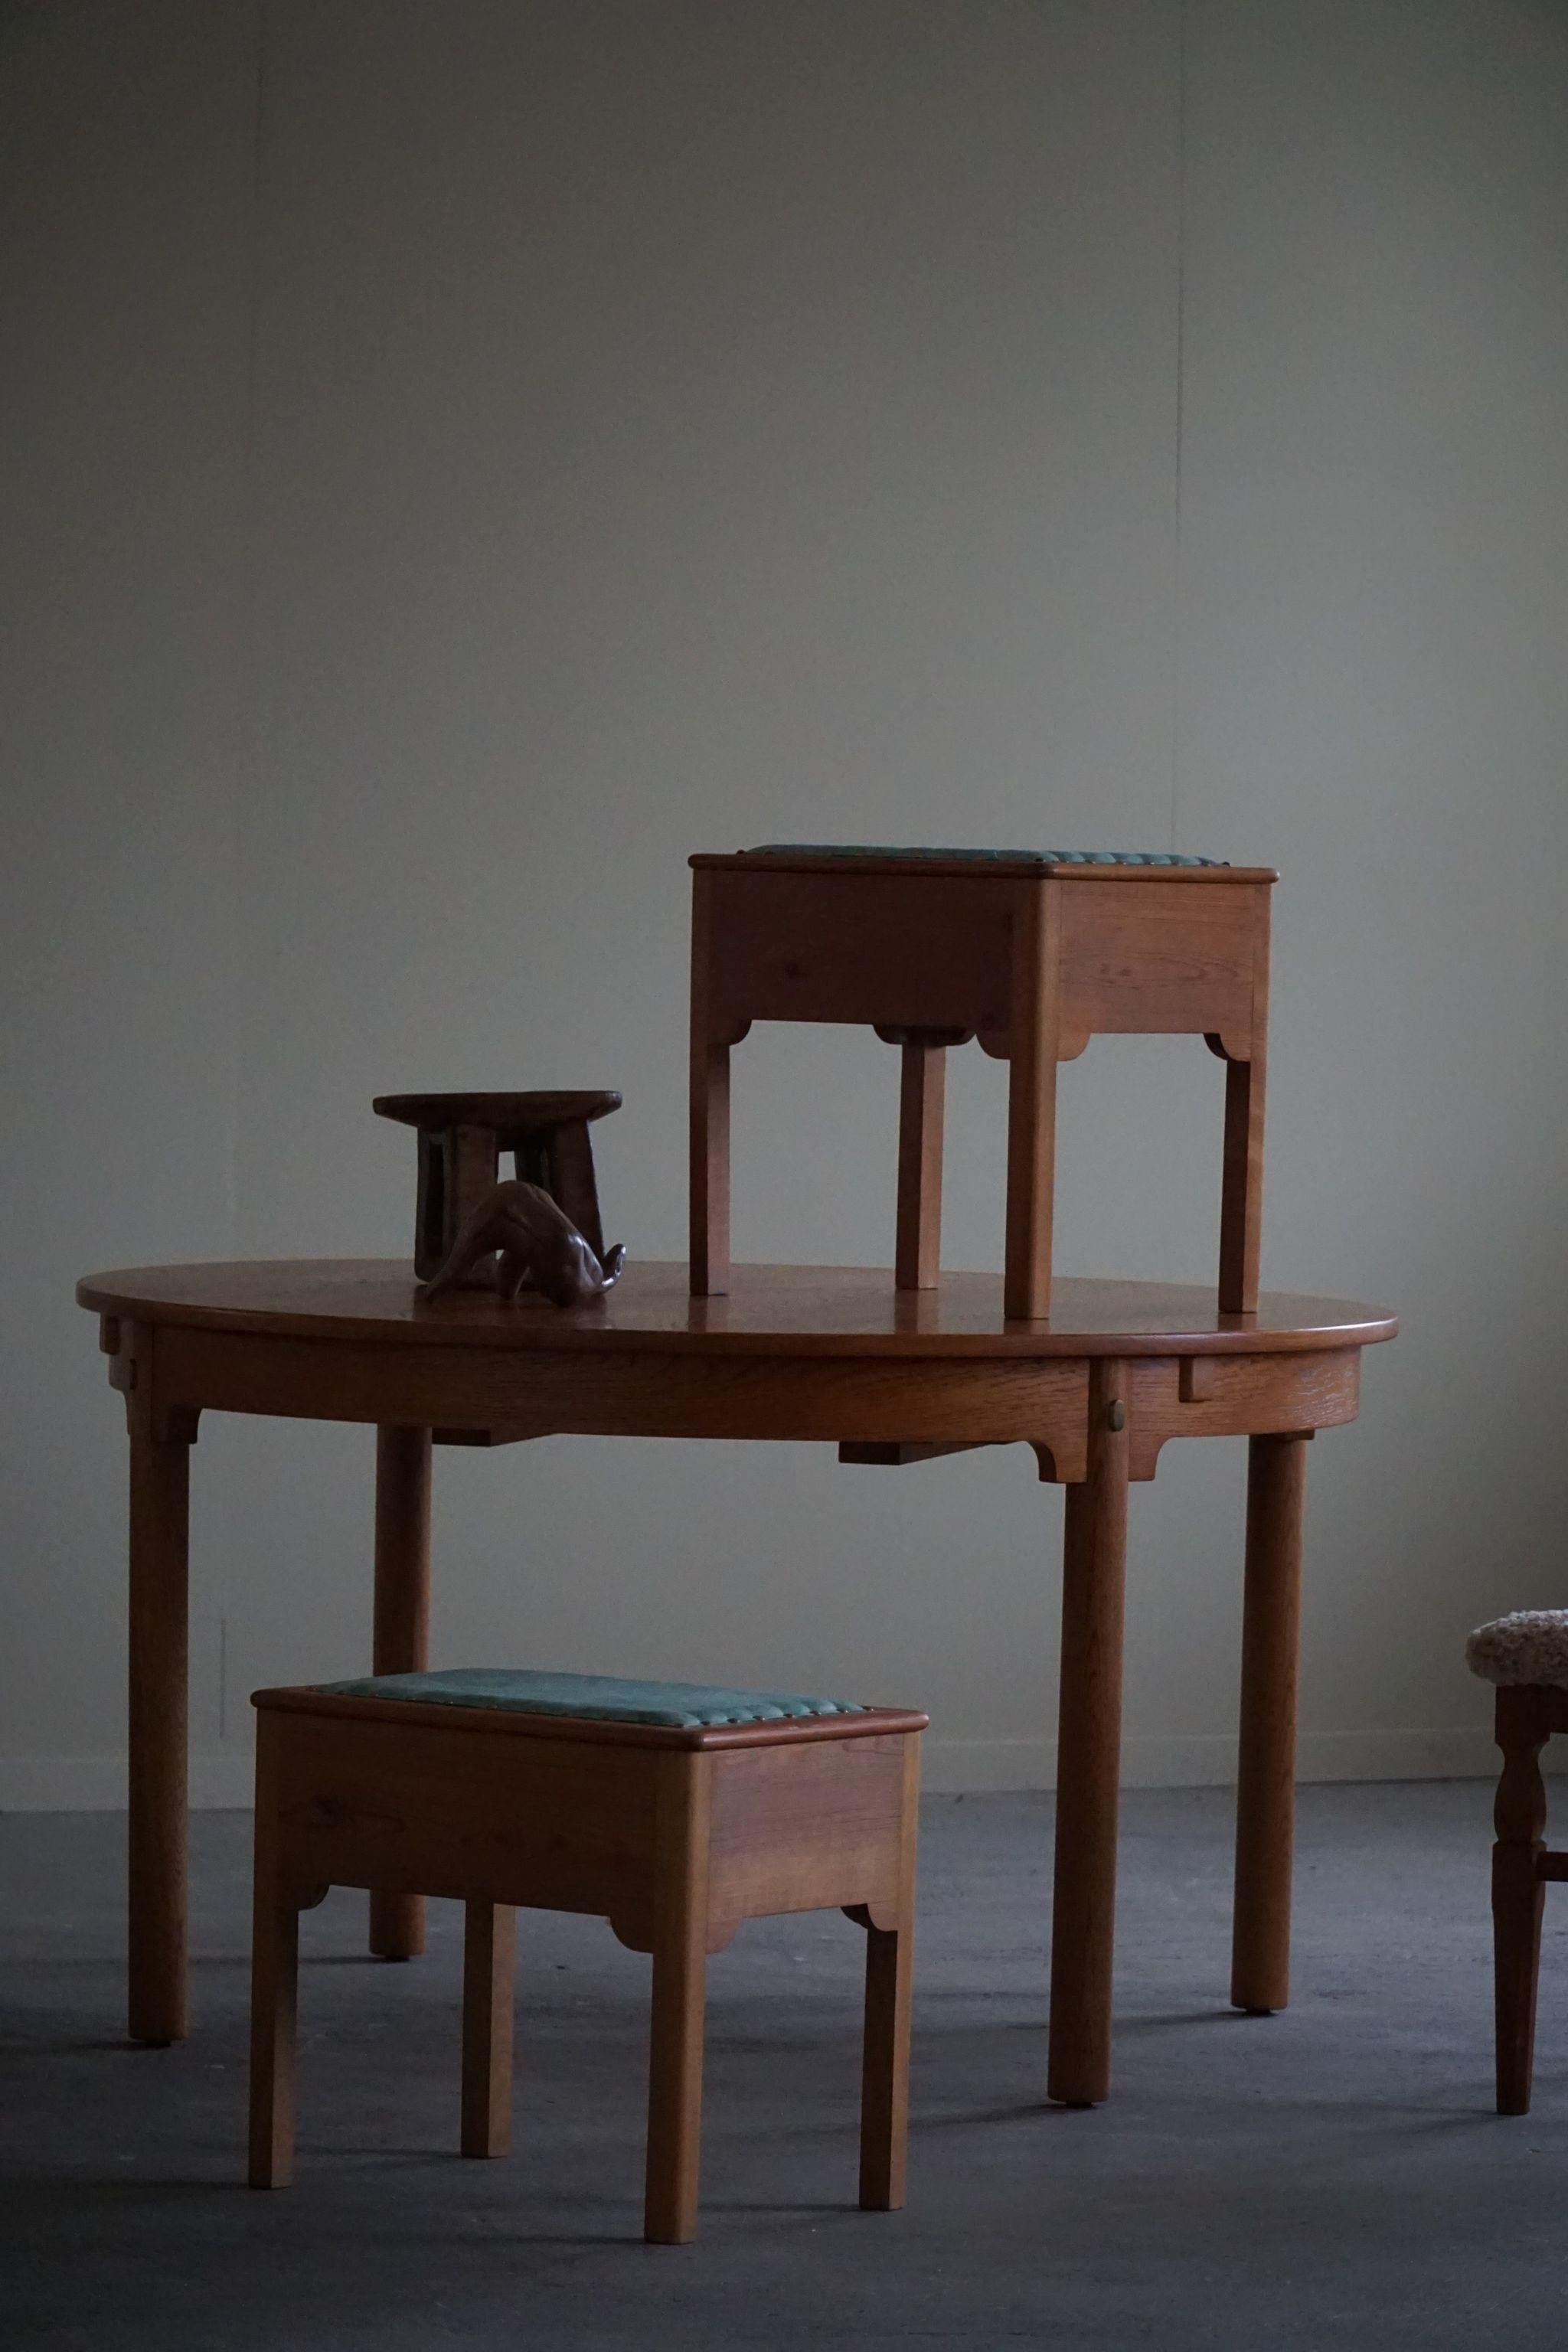 A Pair of Stools in Pine & Fabric with Storage, By a Swedish Cabinetmaker, 1950s In Good Condition For Sale In Odense, DK